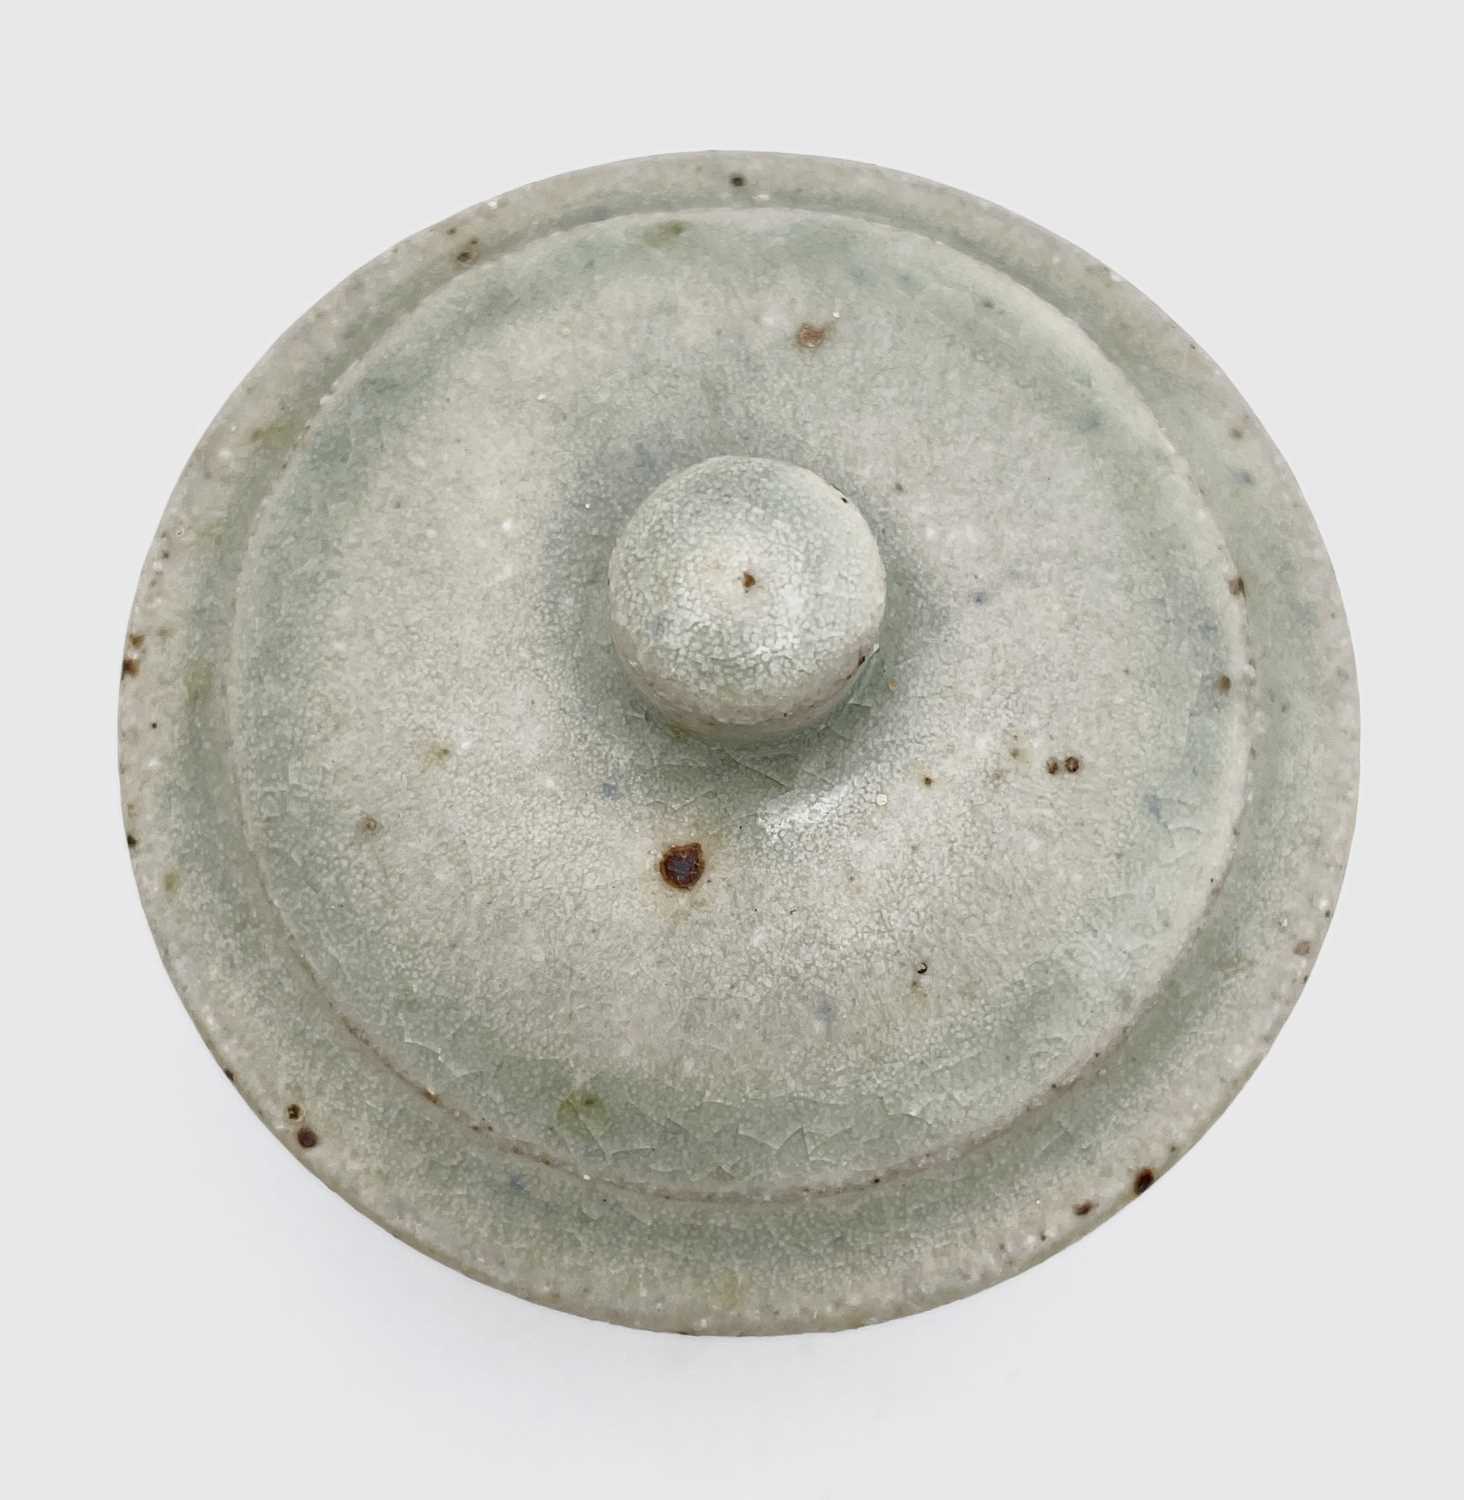 A Bill Marshall (1923-2007) salt, a Richard Batterham small bowl and cover and three other small - Image 18 of 20